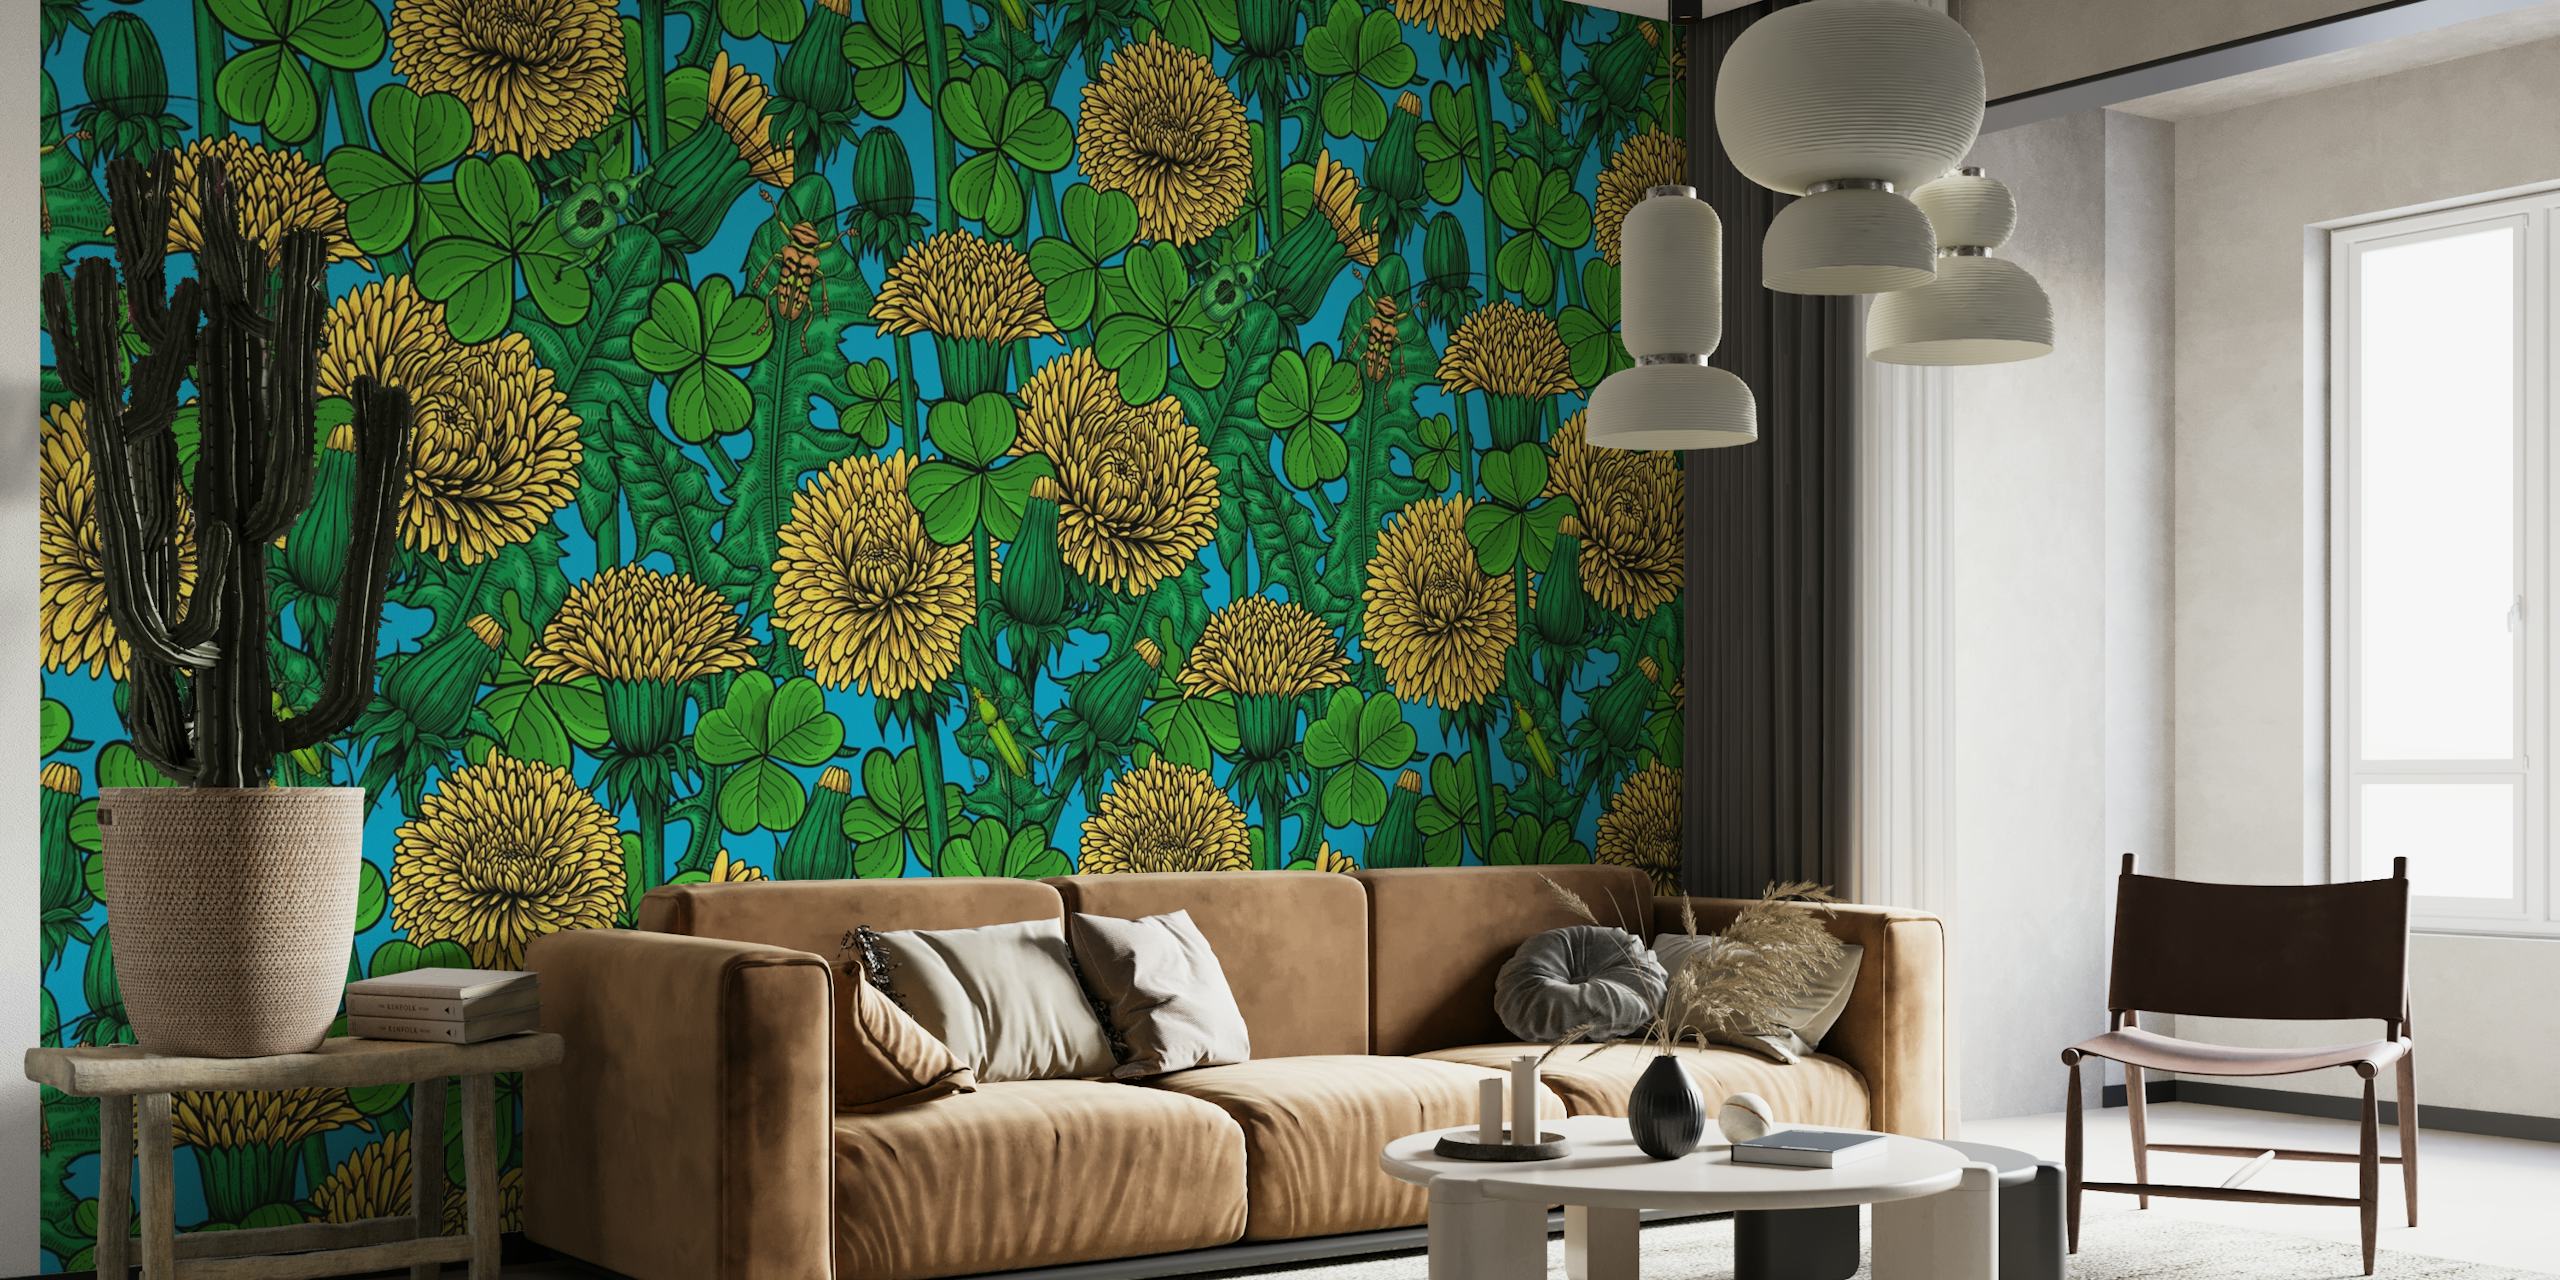 A wall mural with dandelions and clovers on a blue background